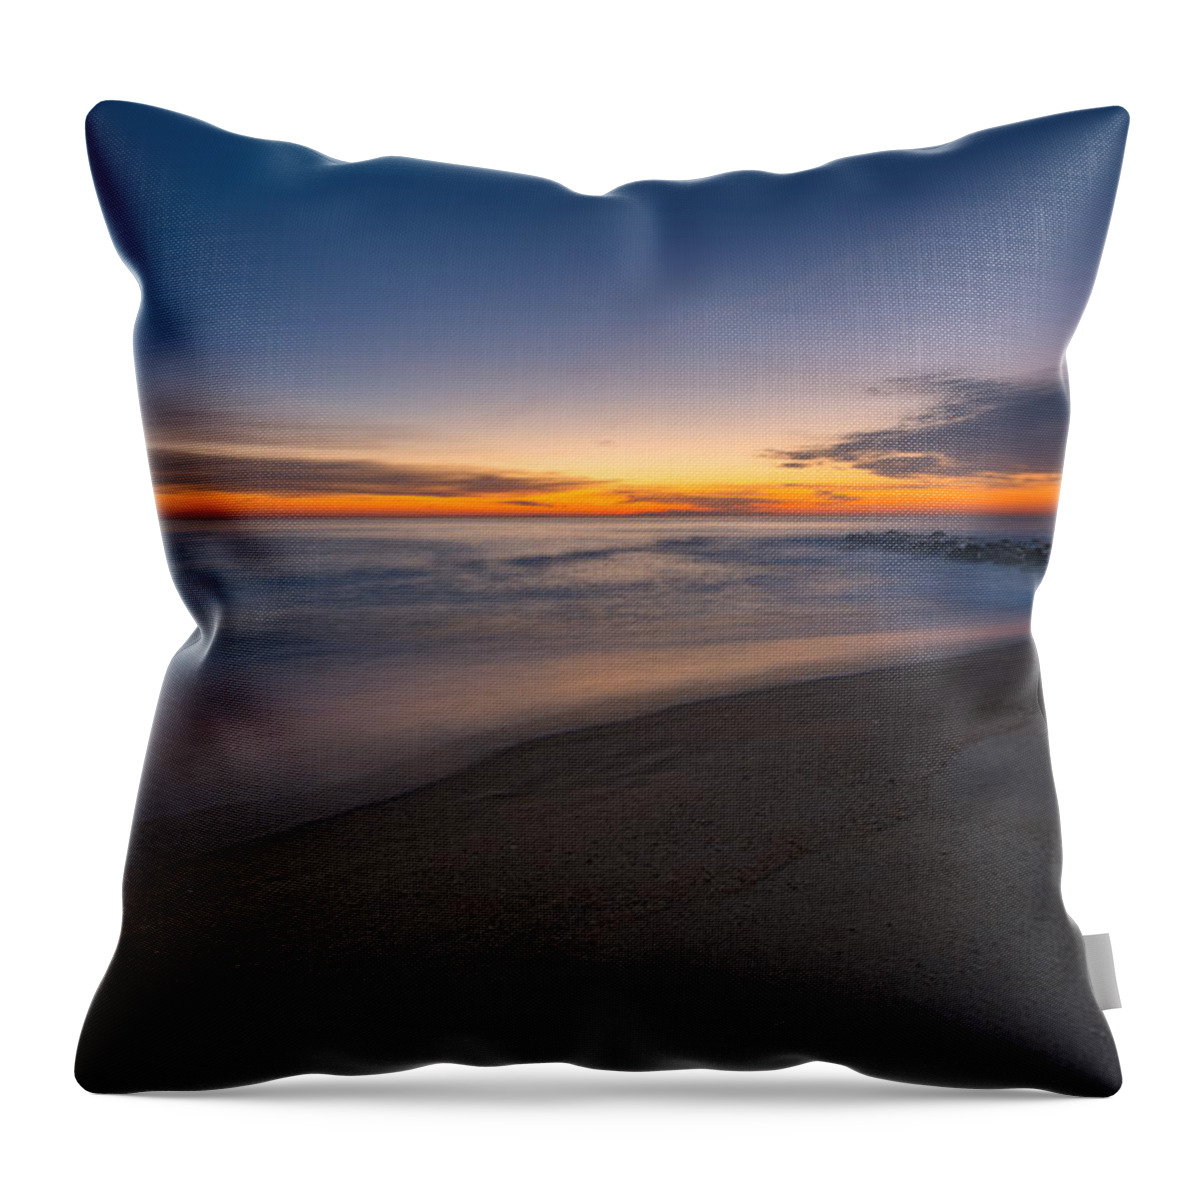 Jersey Shore Sunrise Throw Pillow featuring the photograph Sea Girt Sunrise New Jersey by Michael Ver Sprill